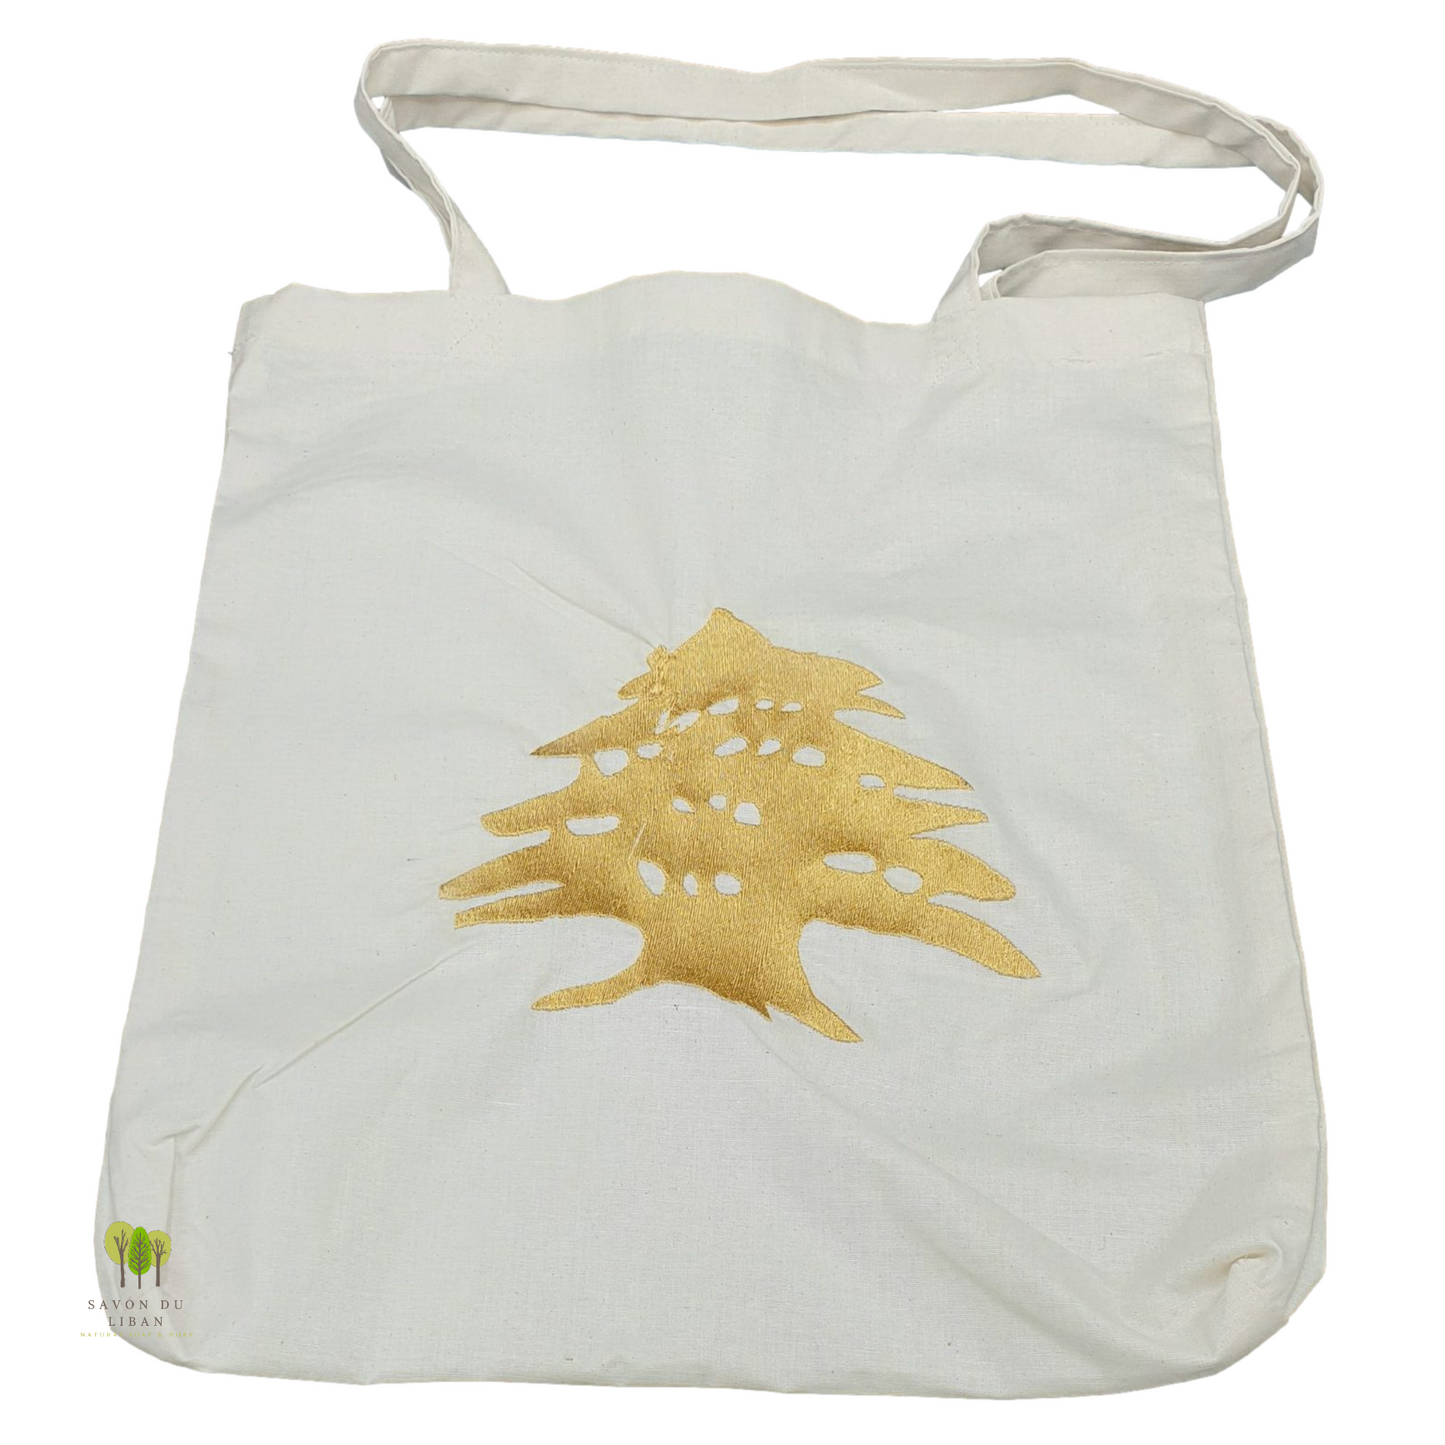 Tote Bags from Lebanon